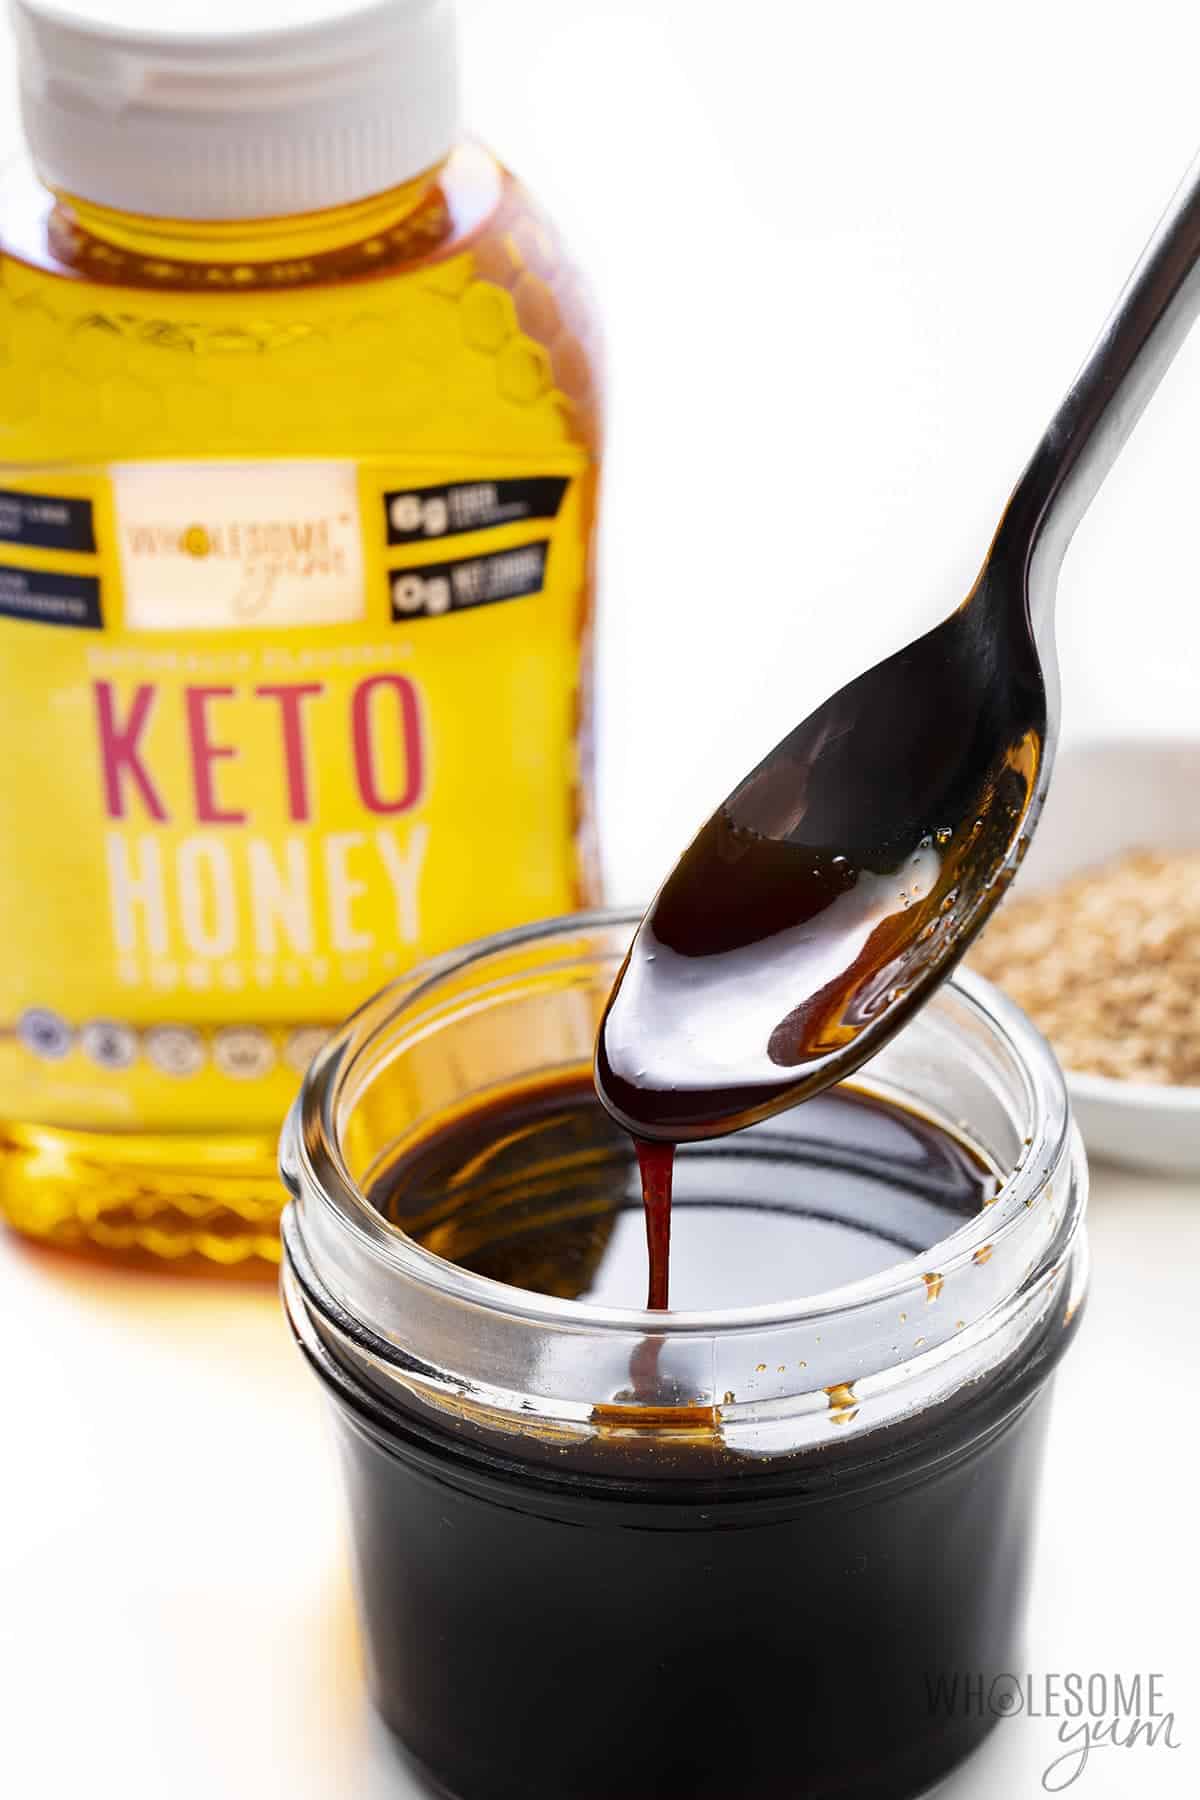 Low carb teriyaki sauce with a spoon and keto honey.